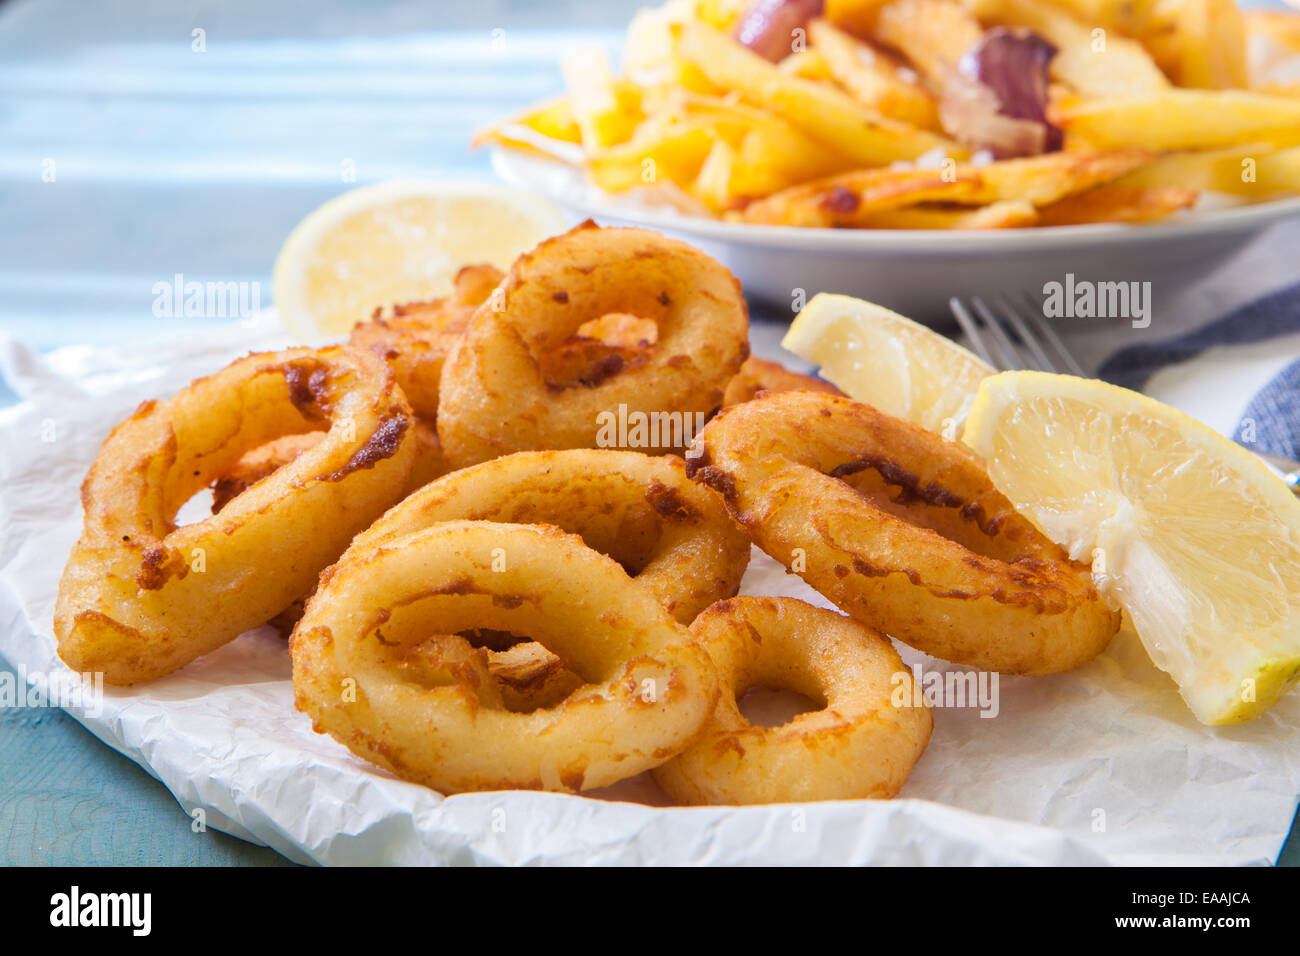 some calamari rings deep fried with lemon and fries Stock Photo